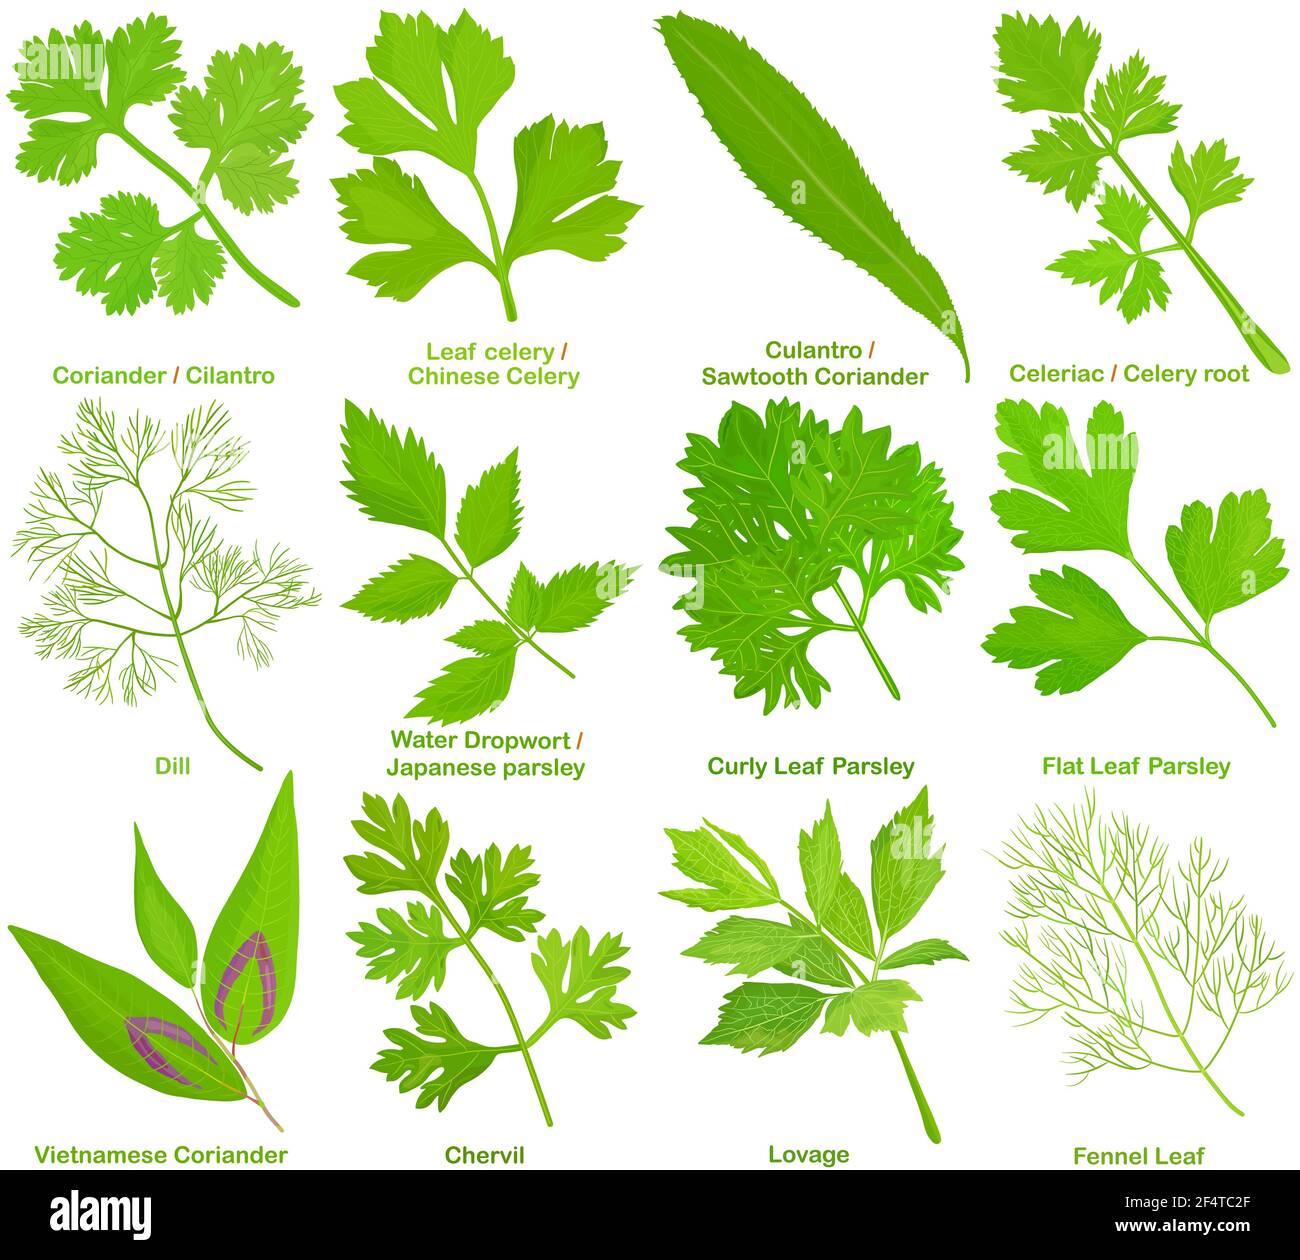 Vector of aromatic culinary Herb, leaves. Coriander Cilantro Celery Culantro Celeriac Dill Parsley Chervil Lovage Fennel Leaf. Healthy ingredients. Co Stock Vector